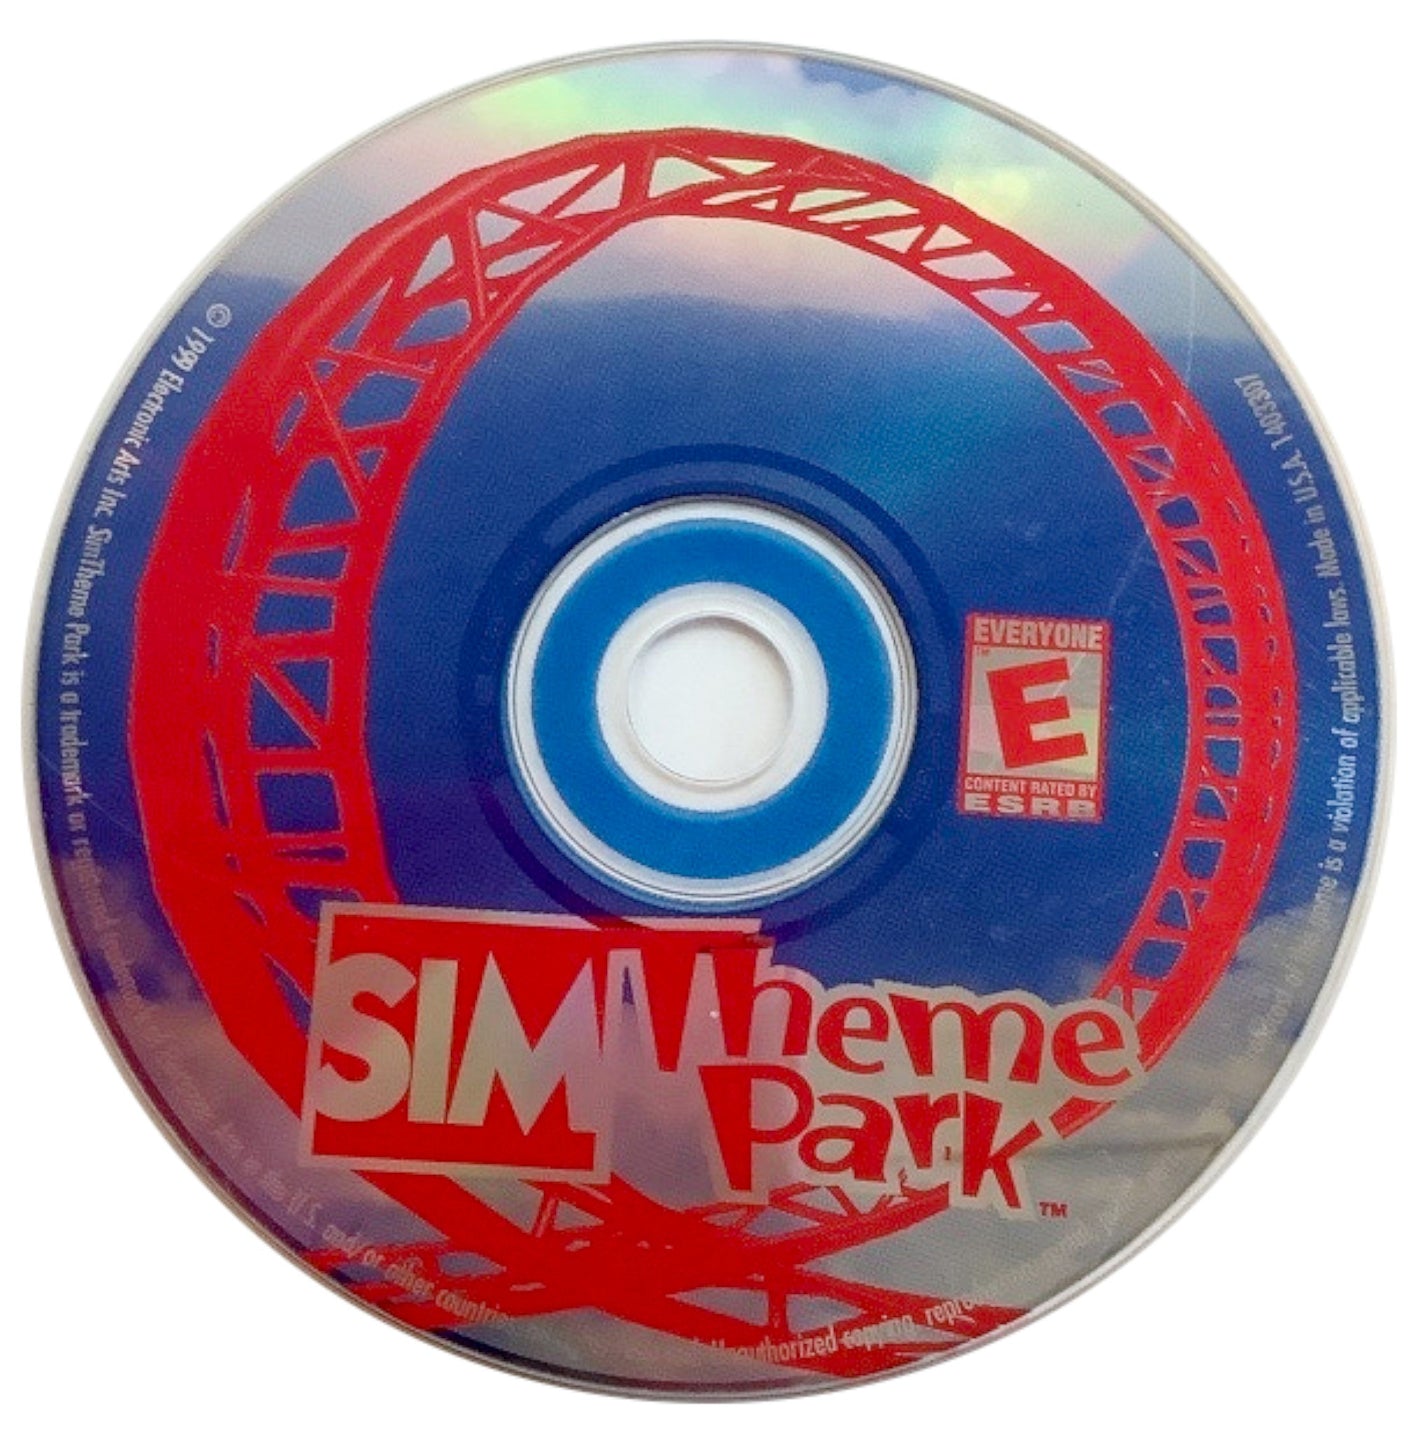 Sim Theme Park PC 1999 Electronic Arts EA Video Game DISC ONLY rollercoaster [Used/Refurbished]